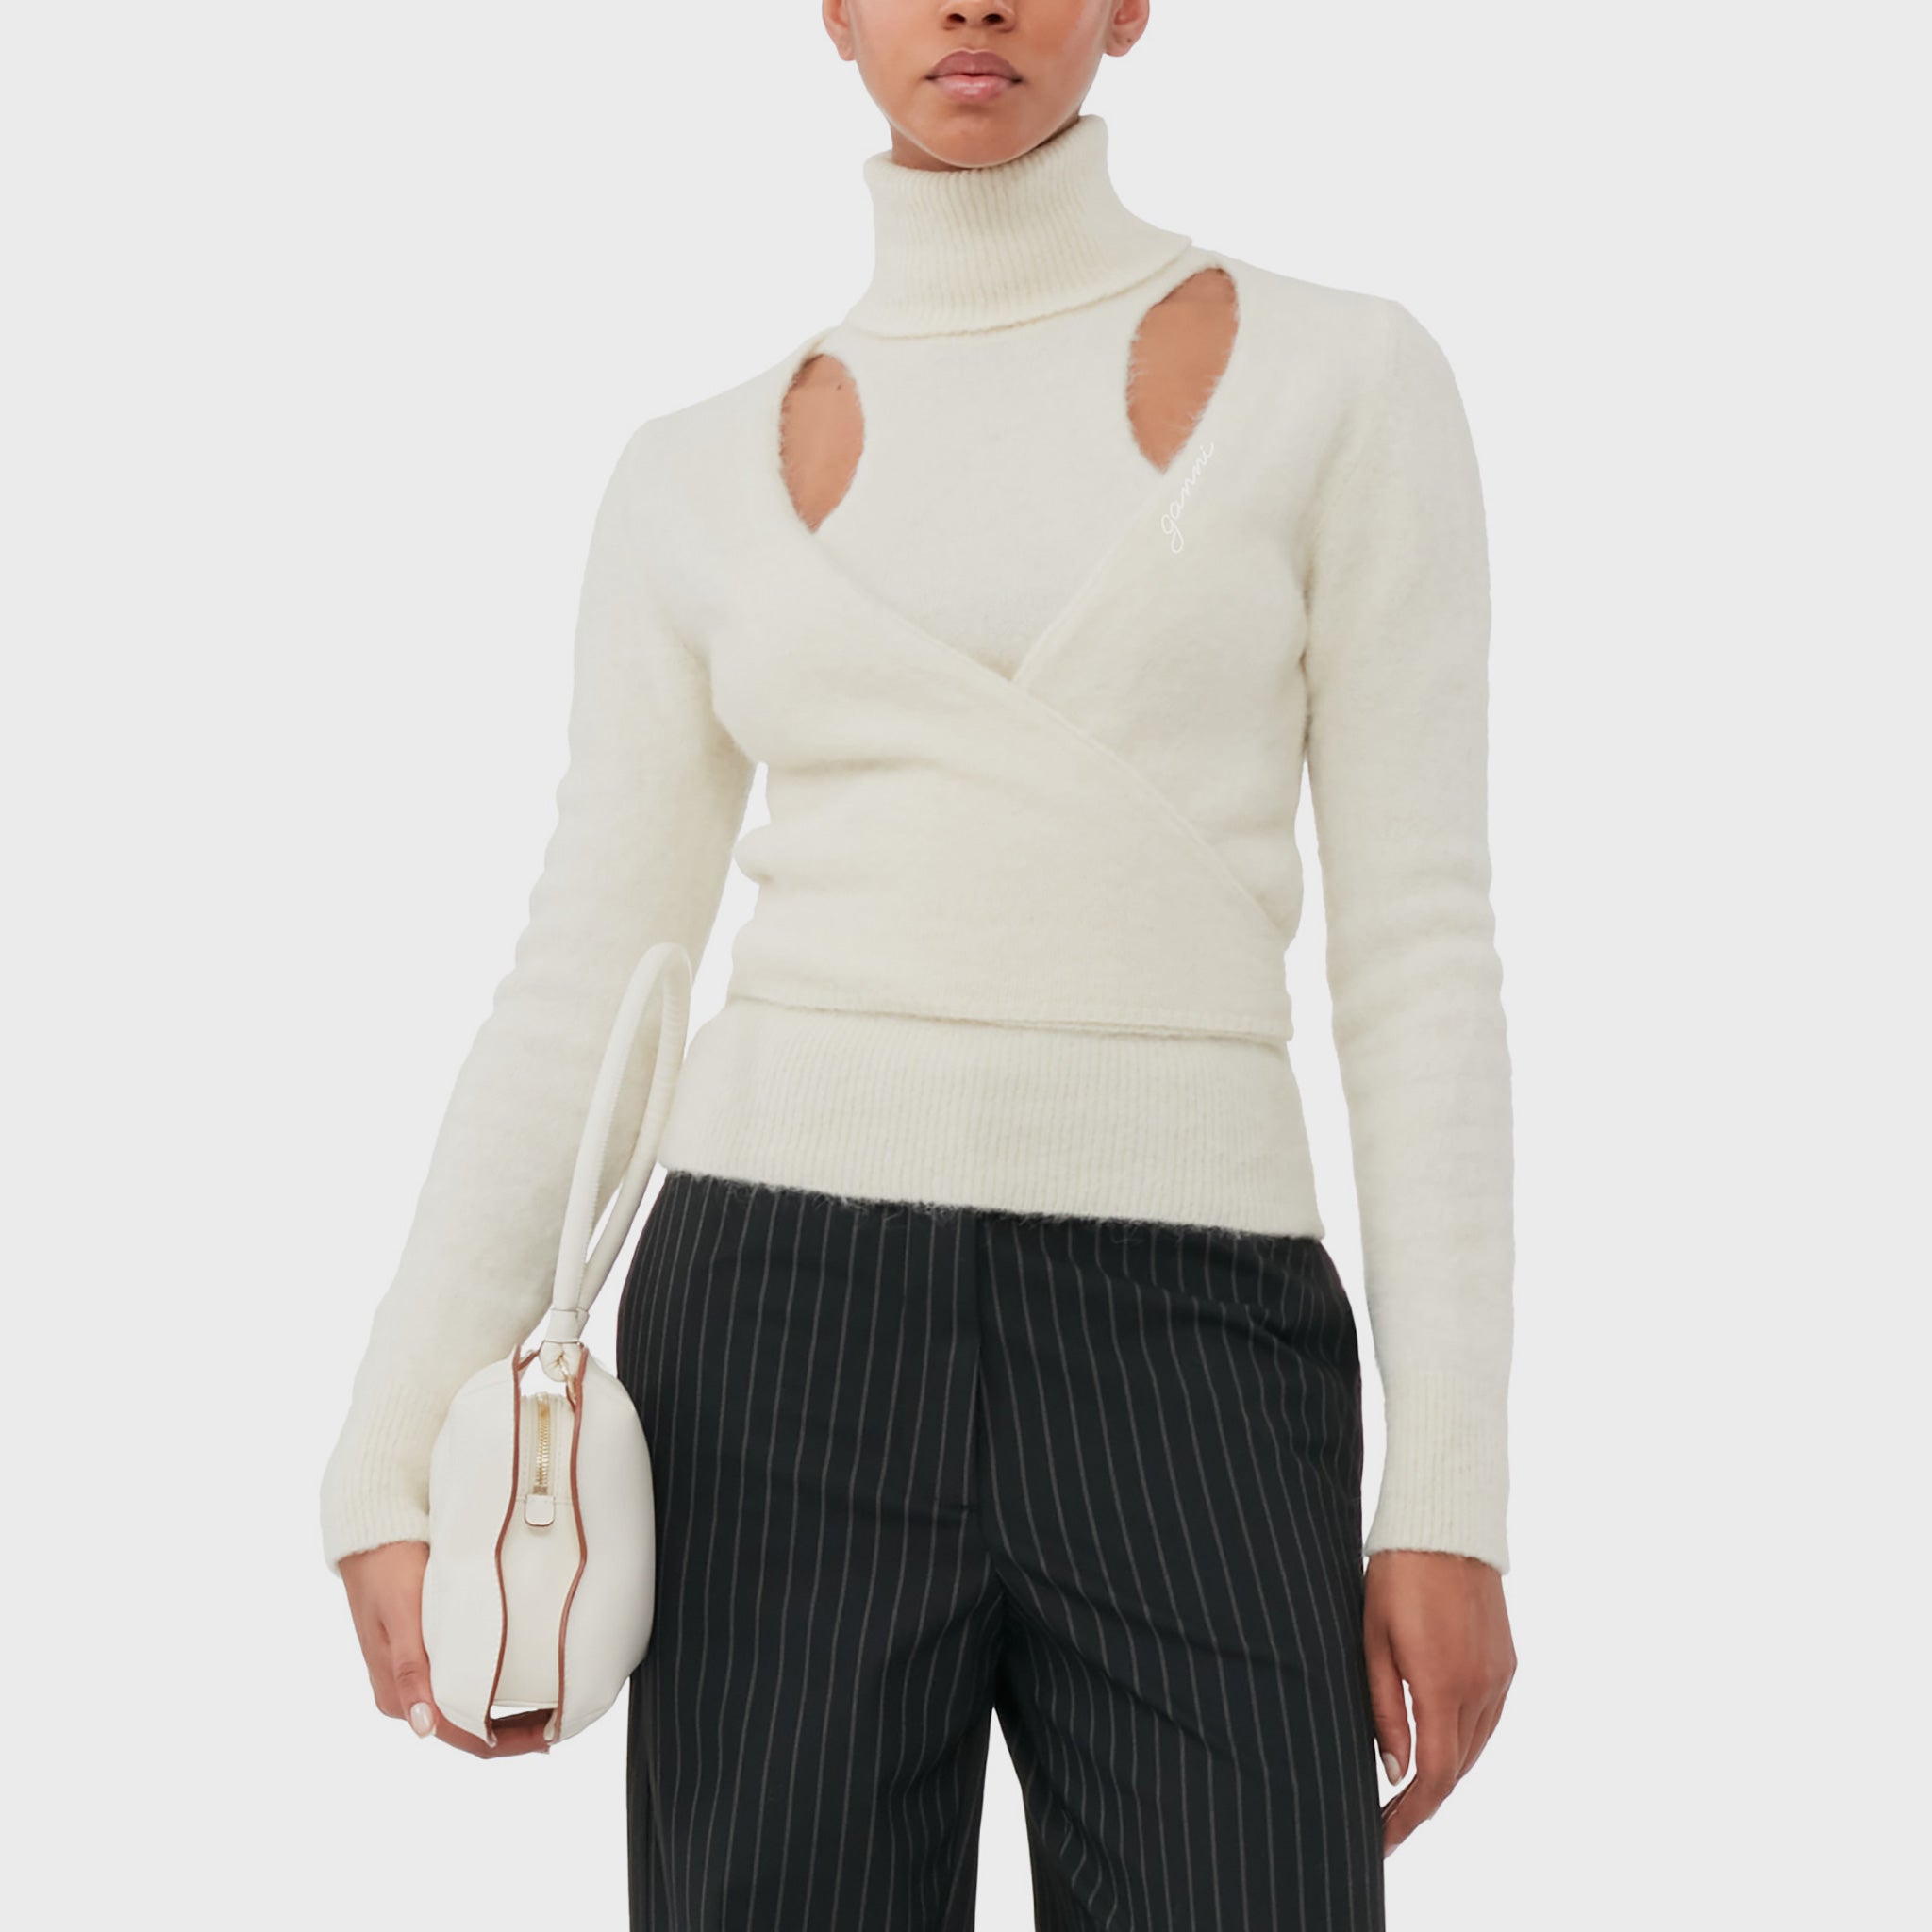 A model wears the soft wrapped white turtleneck sweater with cutout details from GANNI.